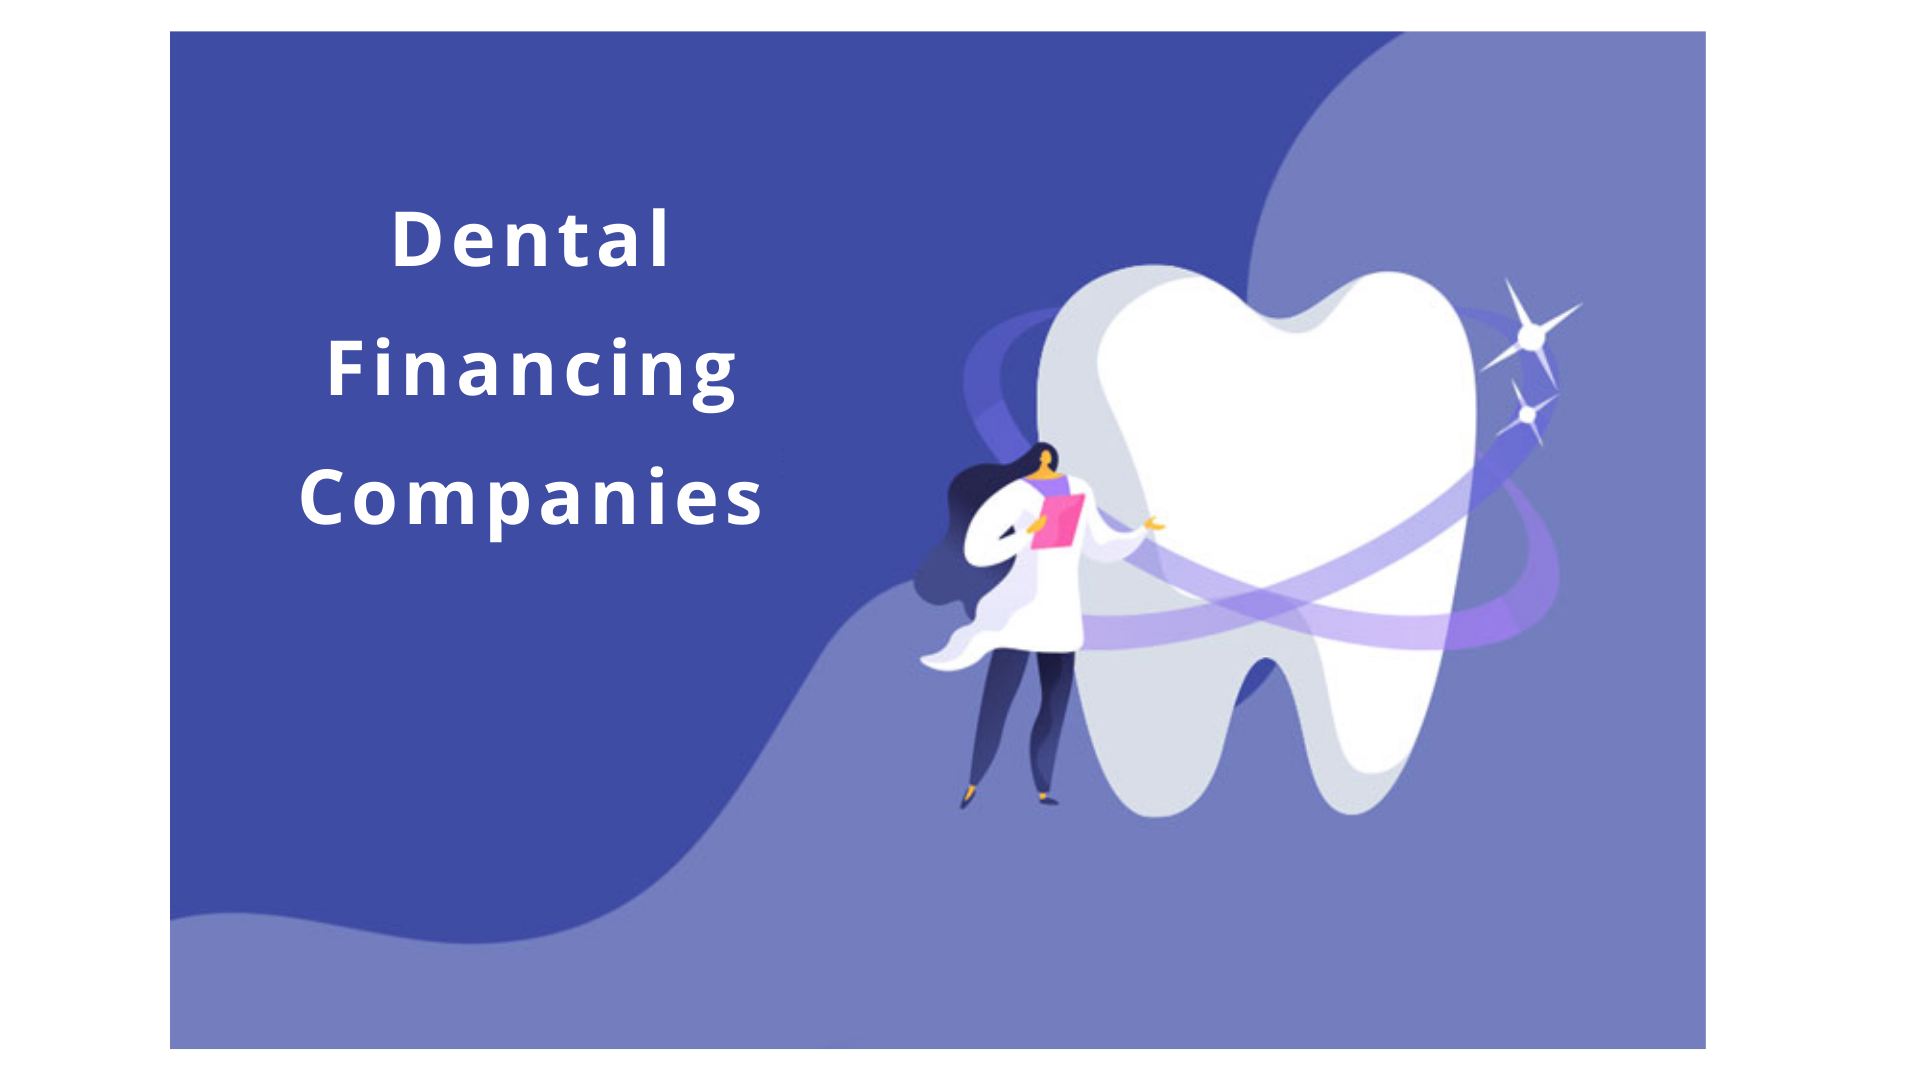 Dental Financing Companies: How to Compare [2023 Guide]